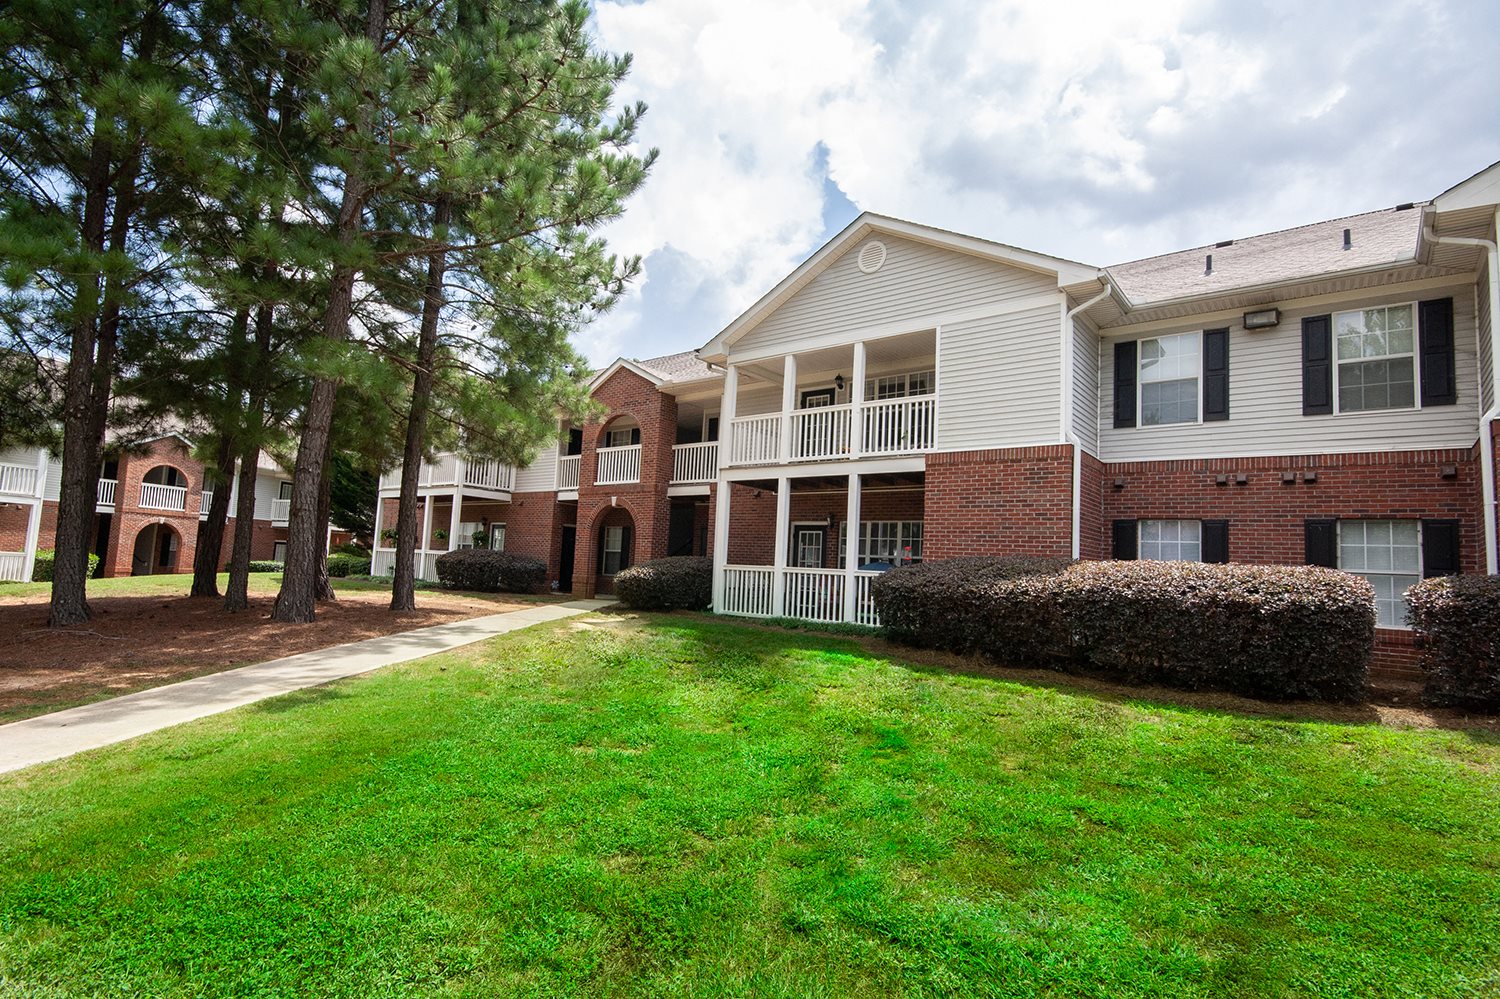 New Apartment Rentals In Villa Rica Ga for Large Space